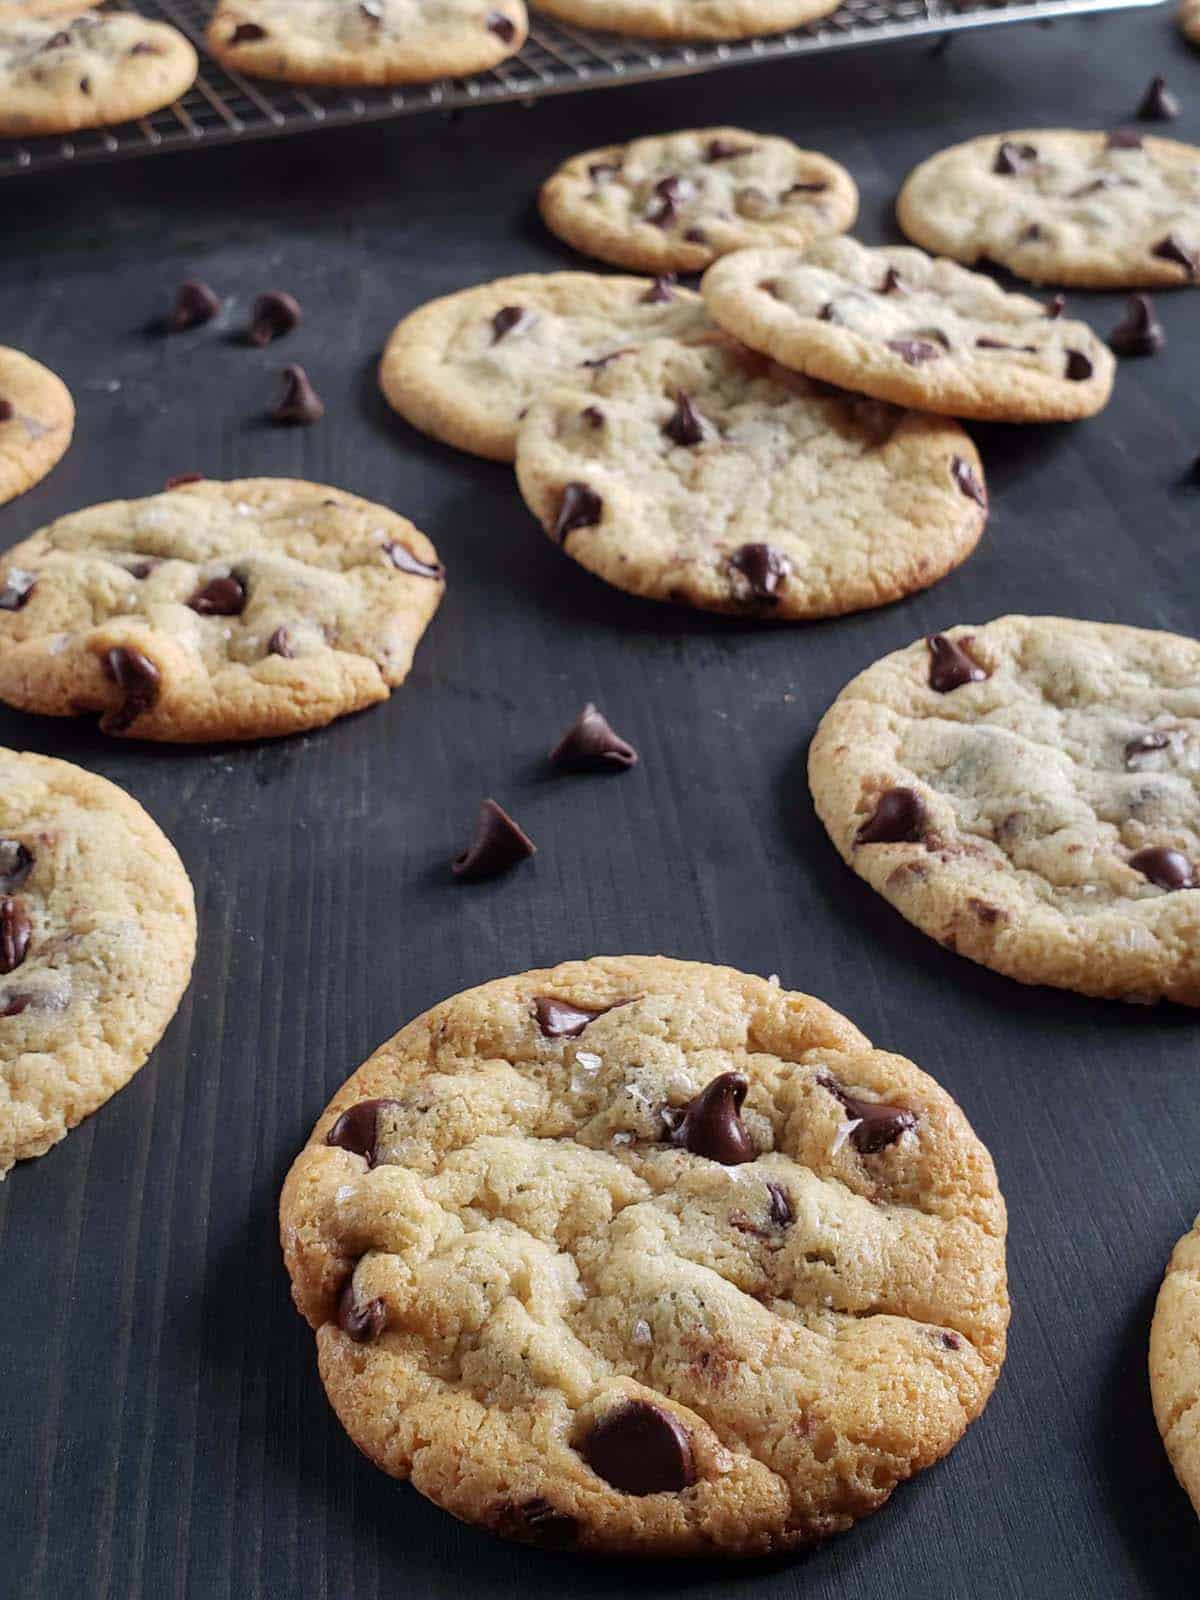 Chocolate chip cookies scattered on a black wood surface.